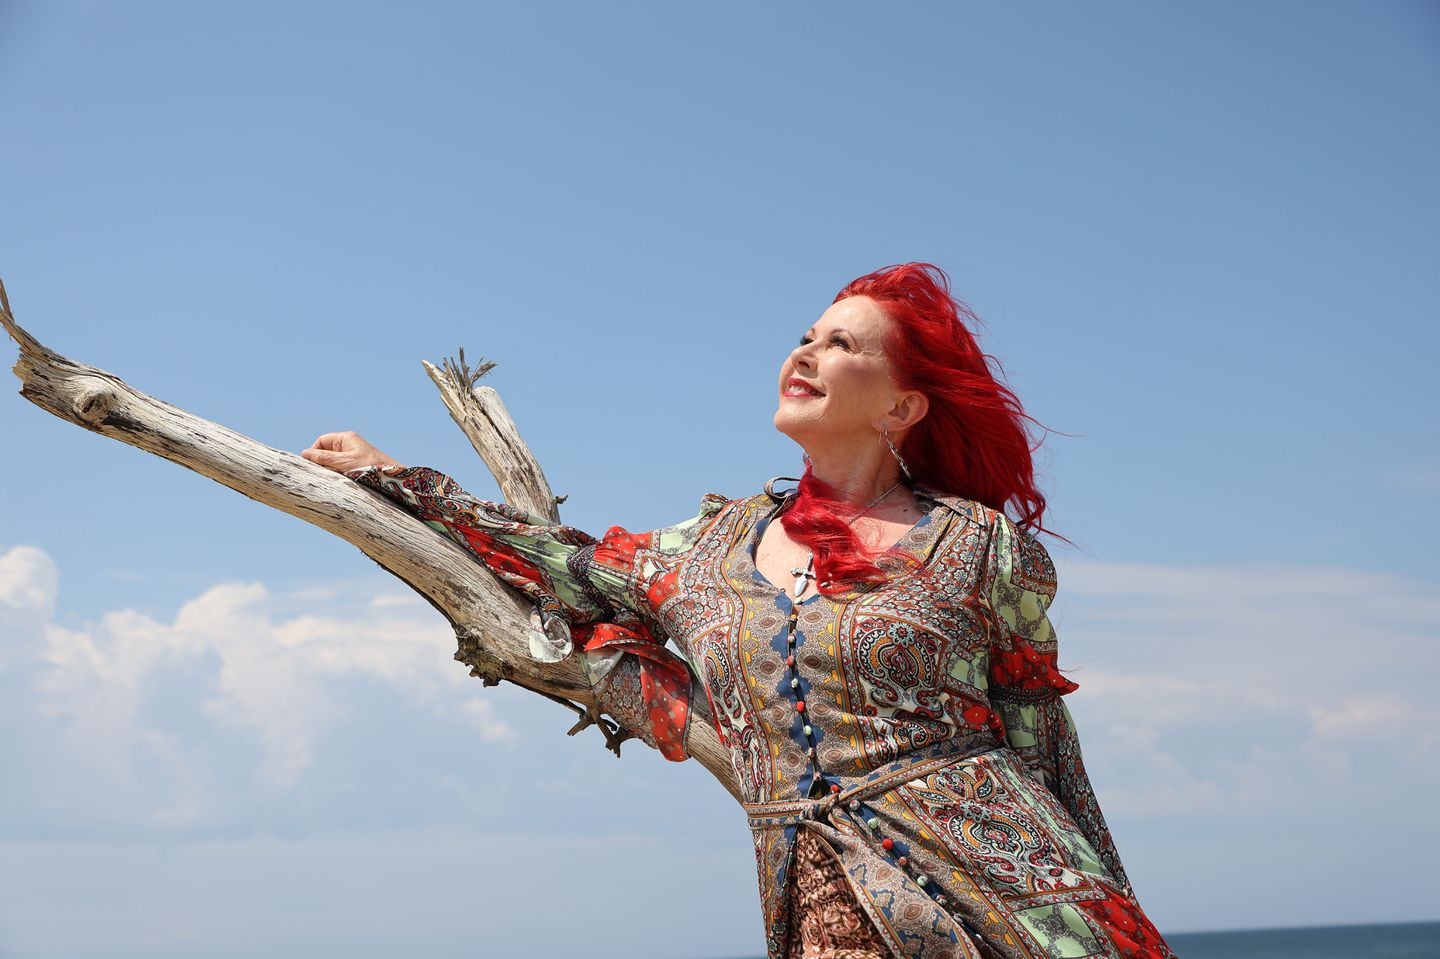 Kate Pierson, of the B-52s, now lives in Truro part of the year. She'll perform as part of the Cape Cod Jazz & Arts Festival in Harwich in August.